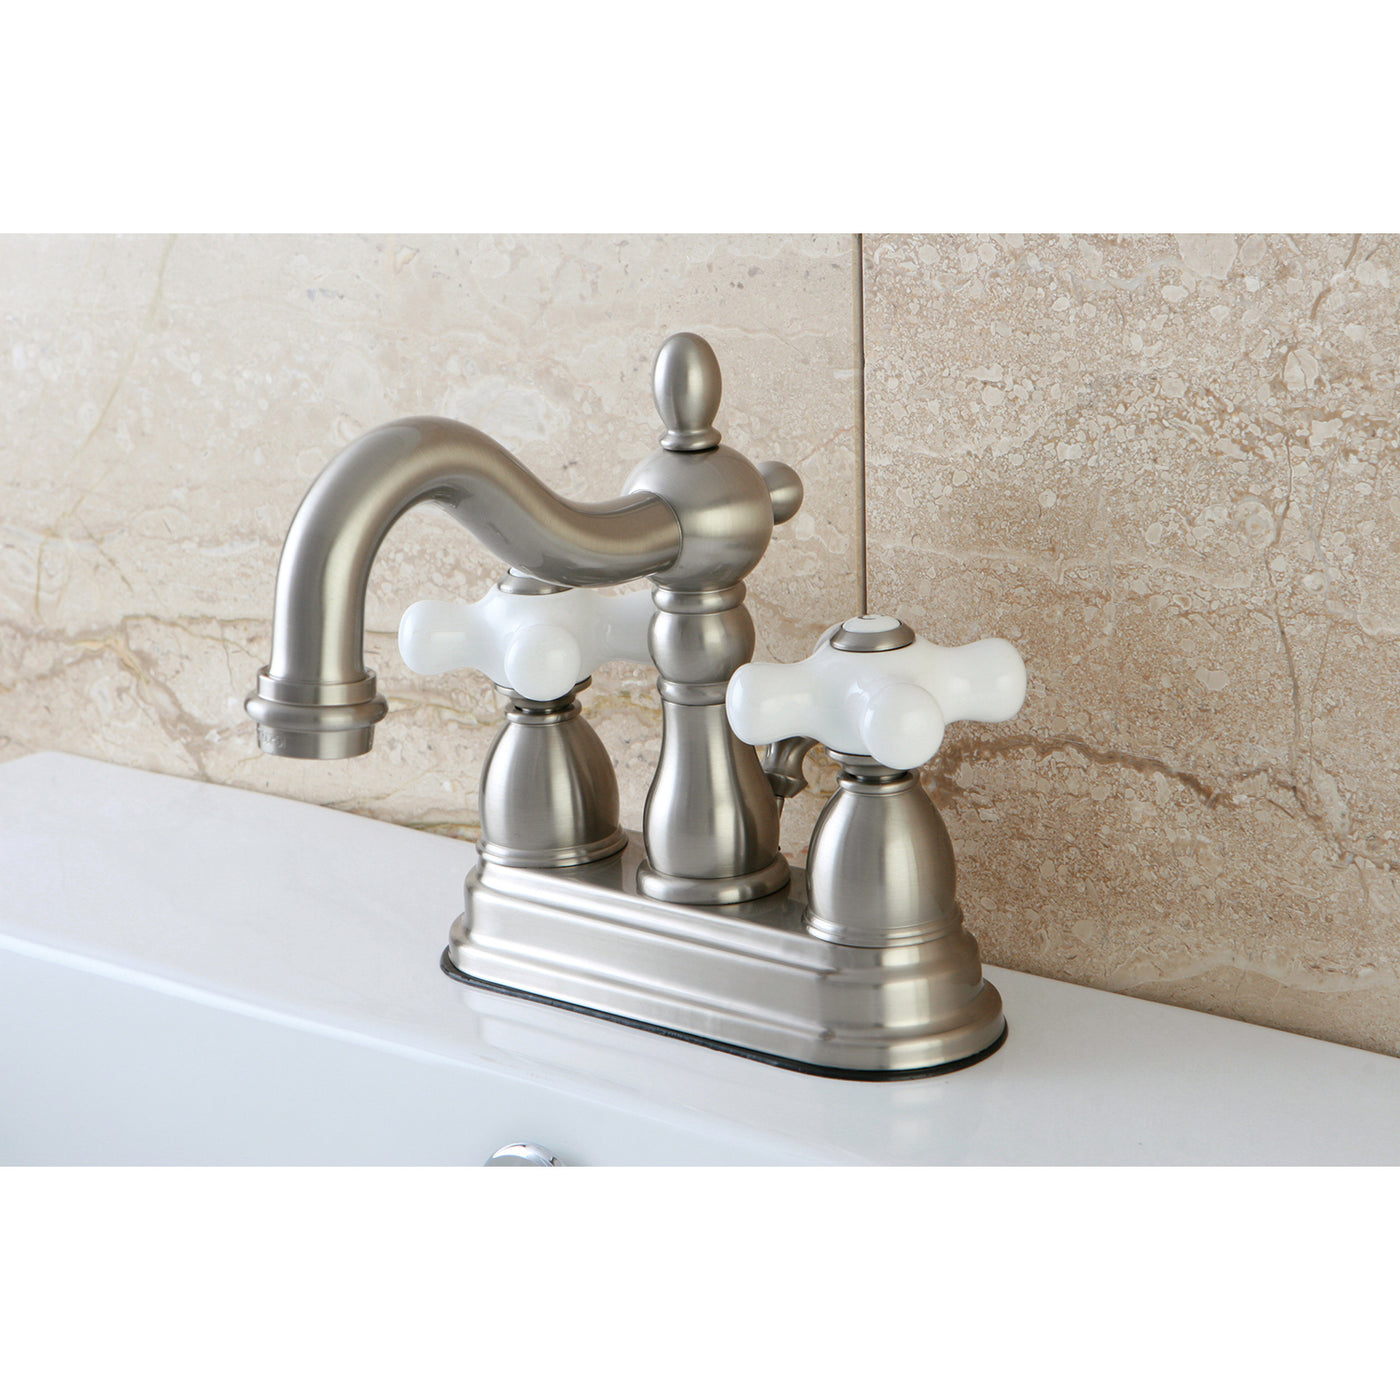 Elements of Design EB1608PX 4-Inch Centerset Bathroom Faucet with Plastic Pop-Up, Brushed Nickel